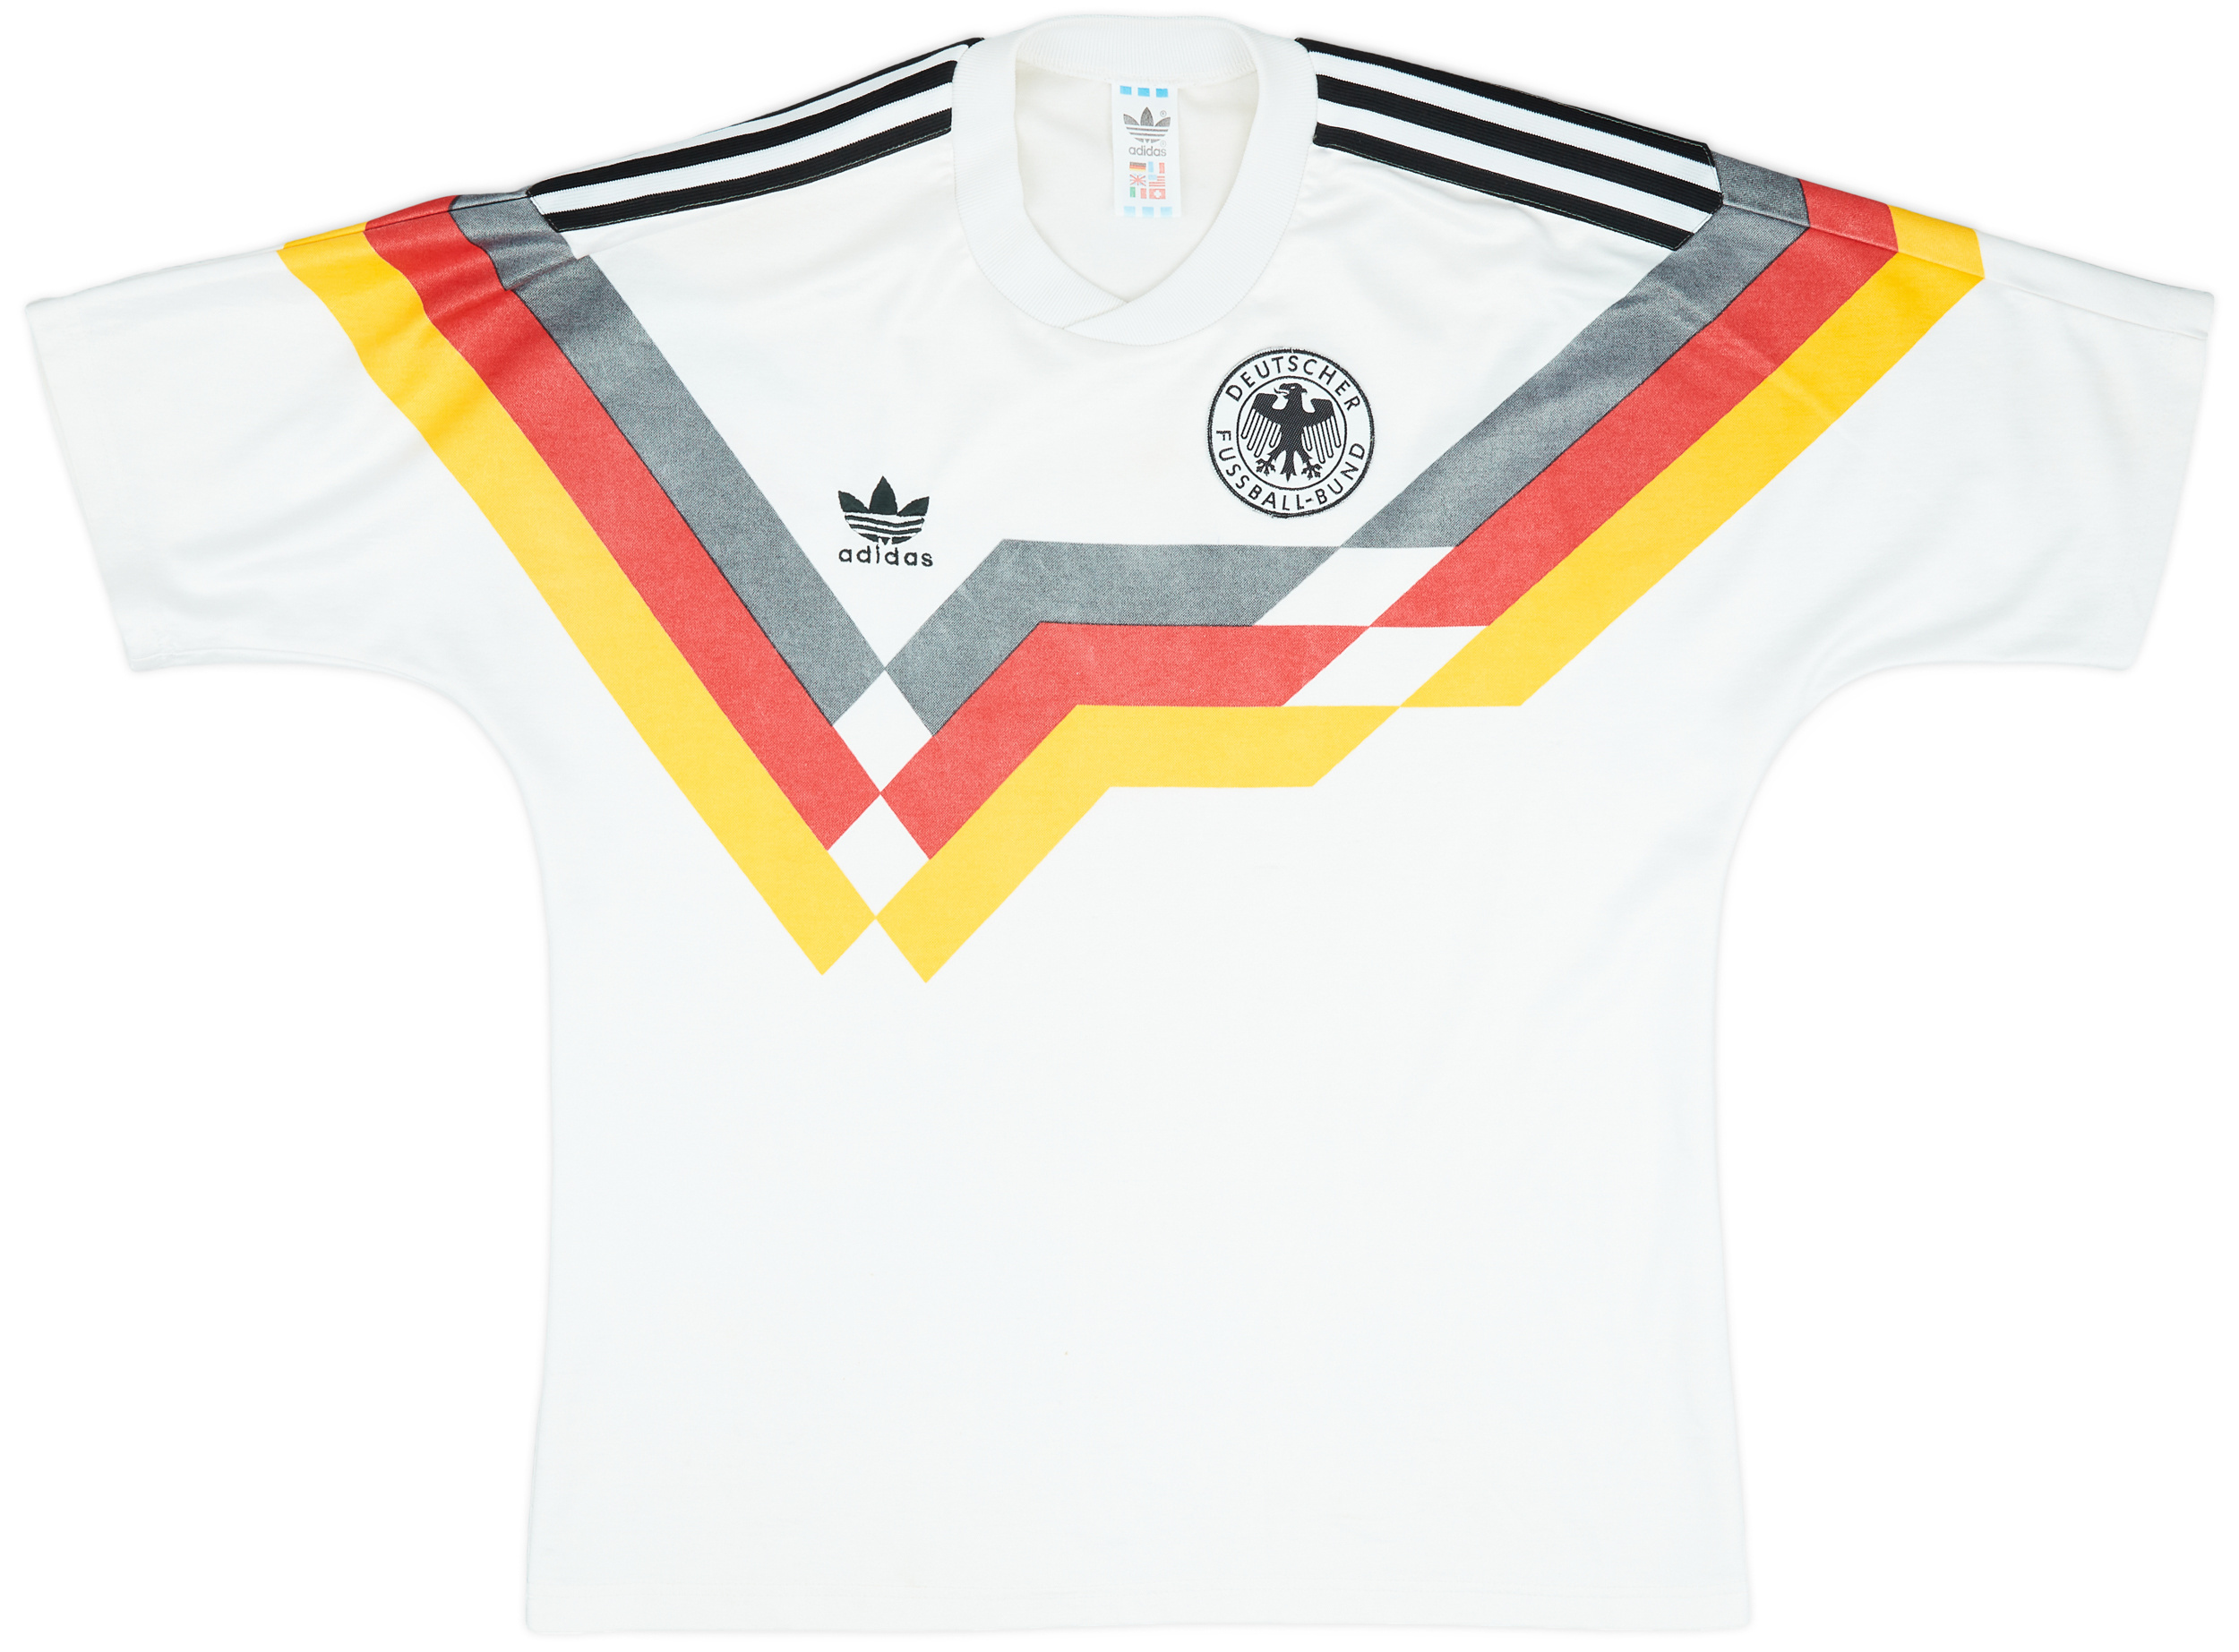 1988-91 West Germany Home Shirt - 8/10 - ()